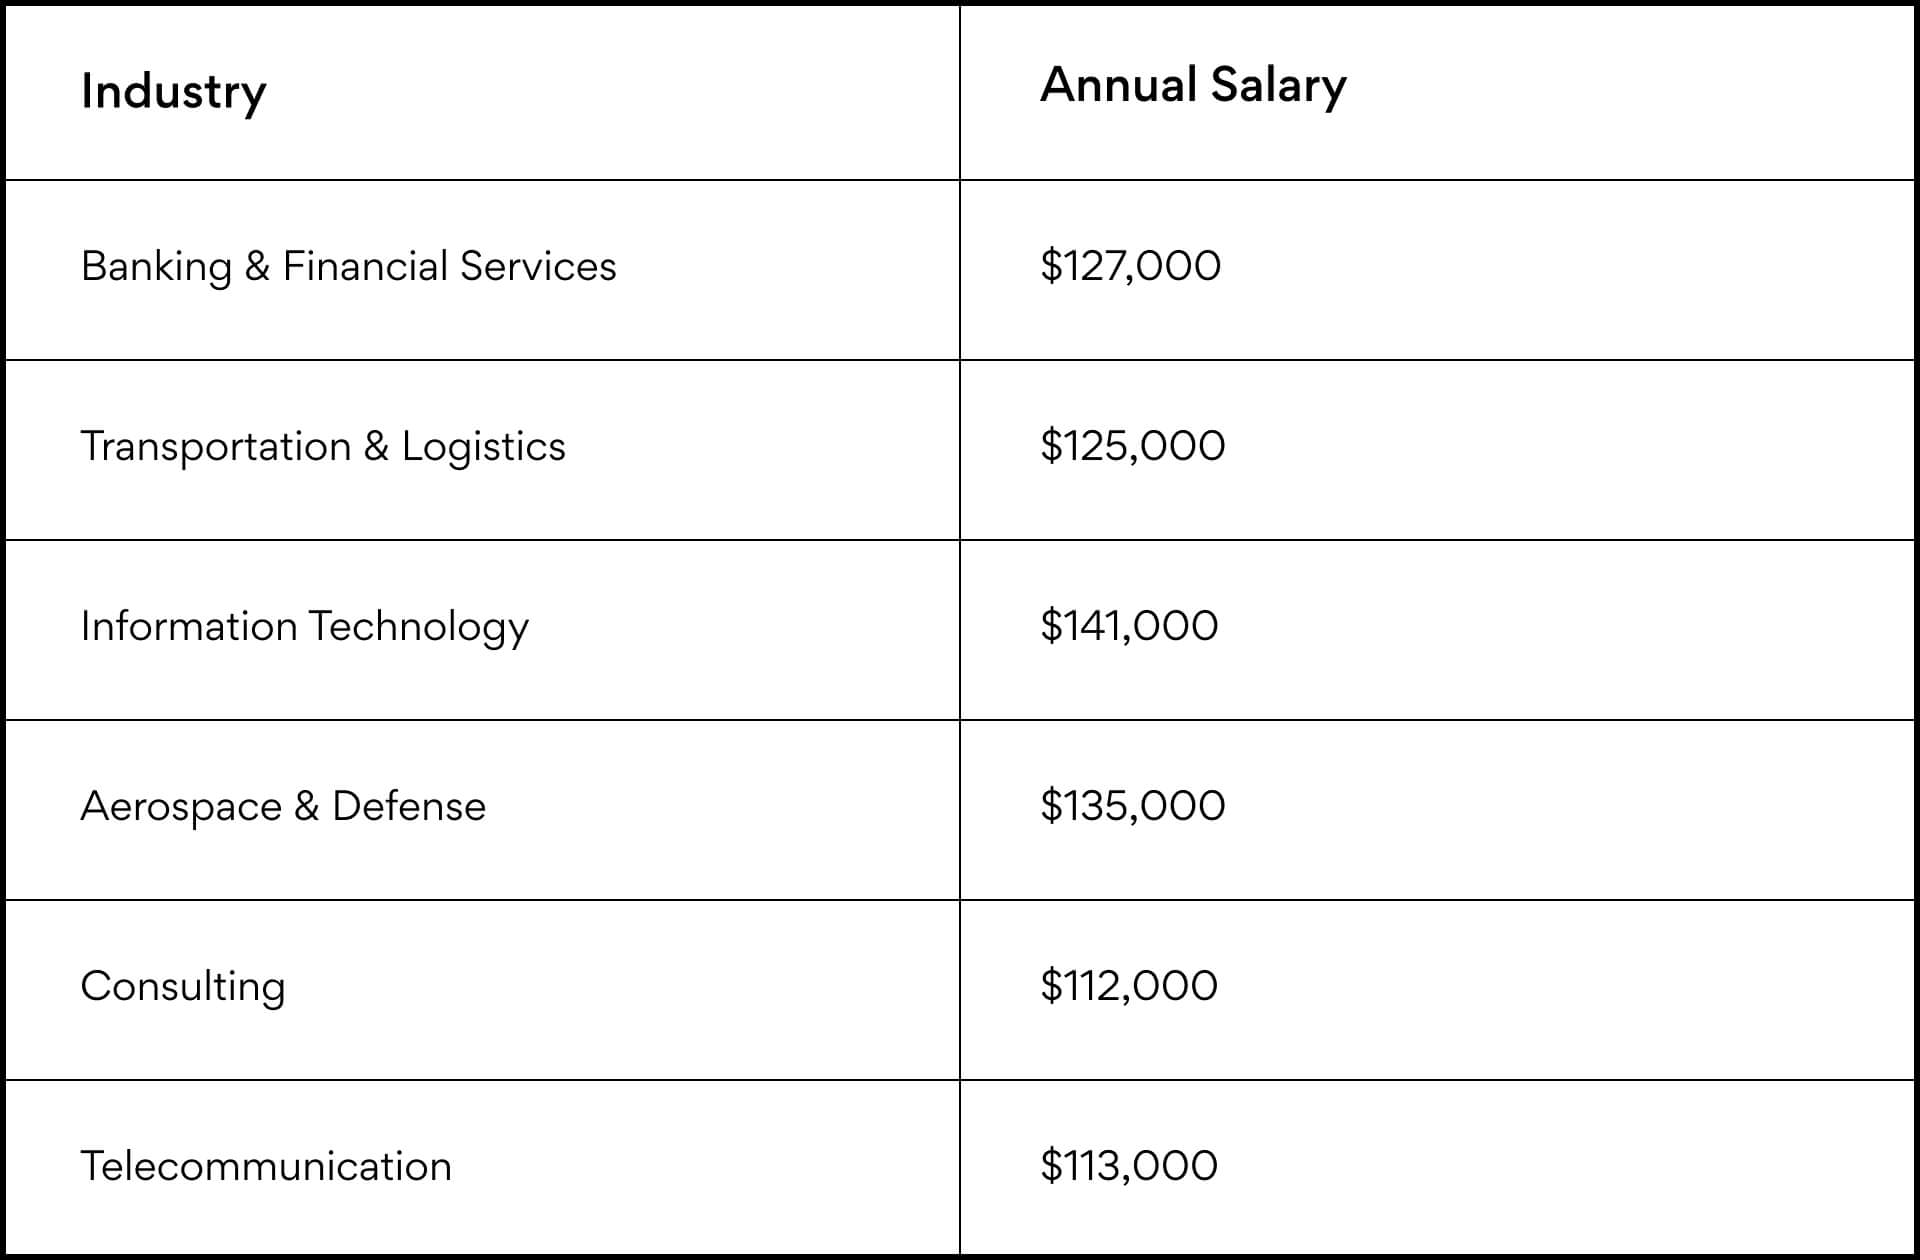 industry-specific salaries for product managers